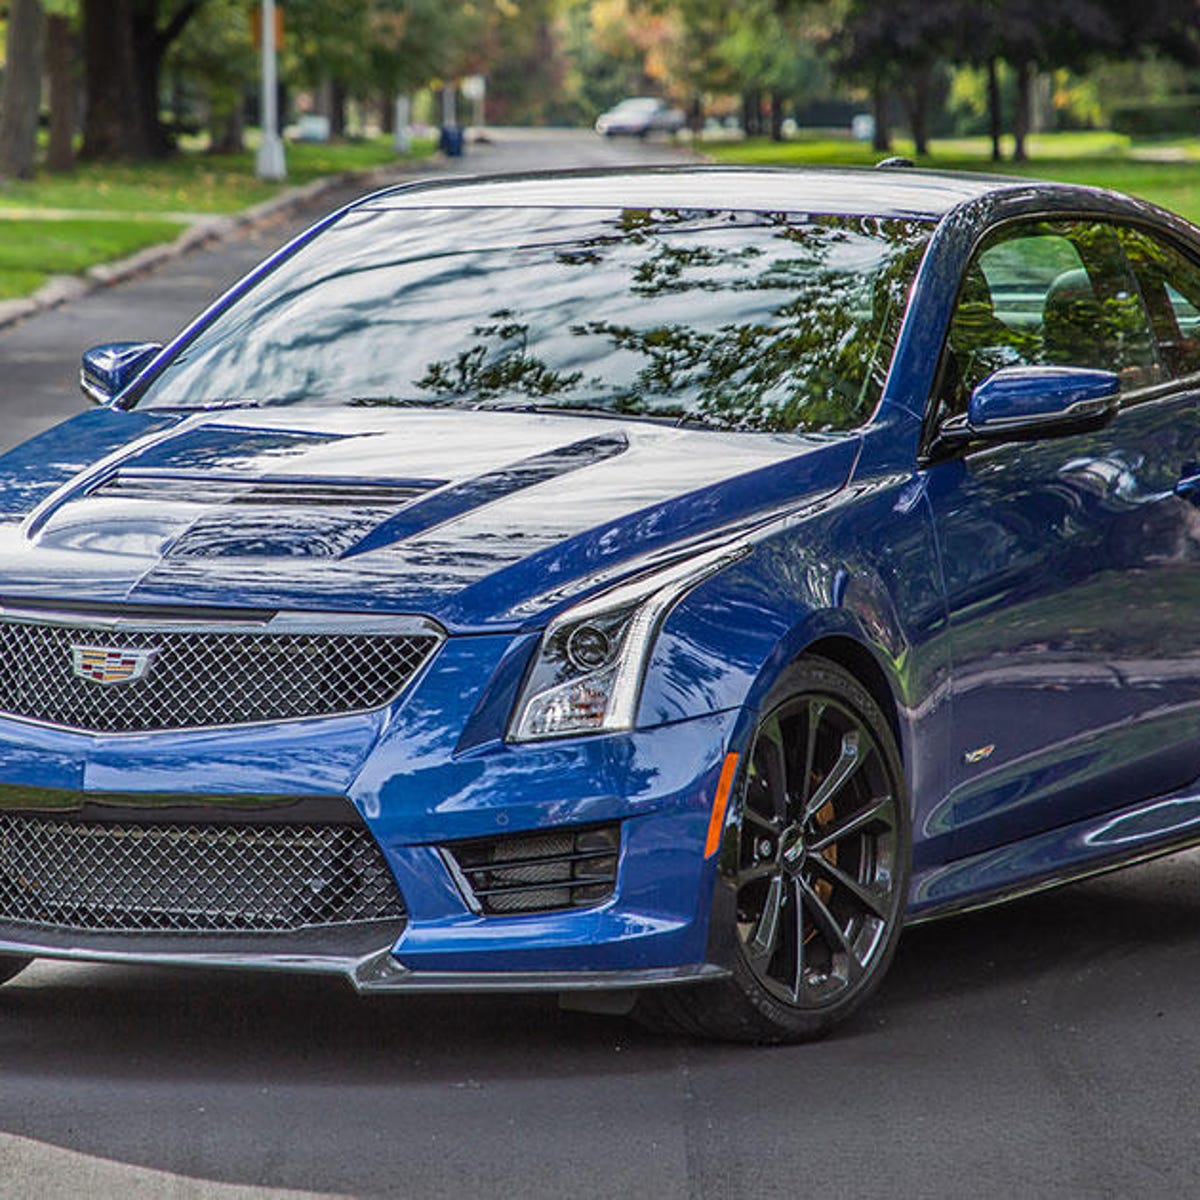 2019 Cadillac ATS-V Coupe review: One last spin in the M4-beater - CNET